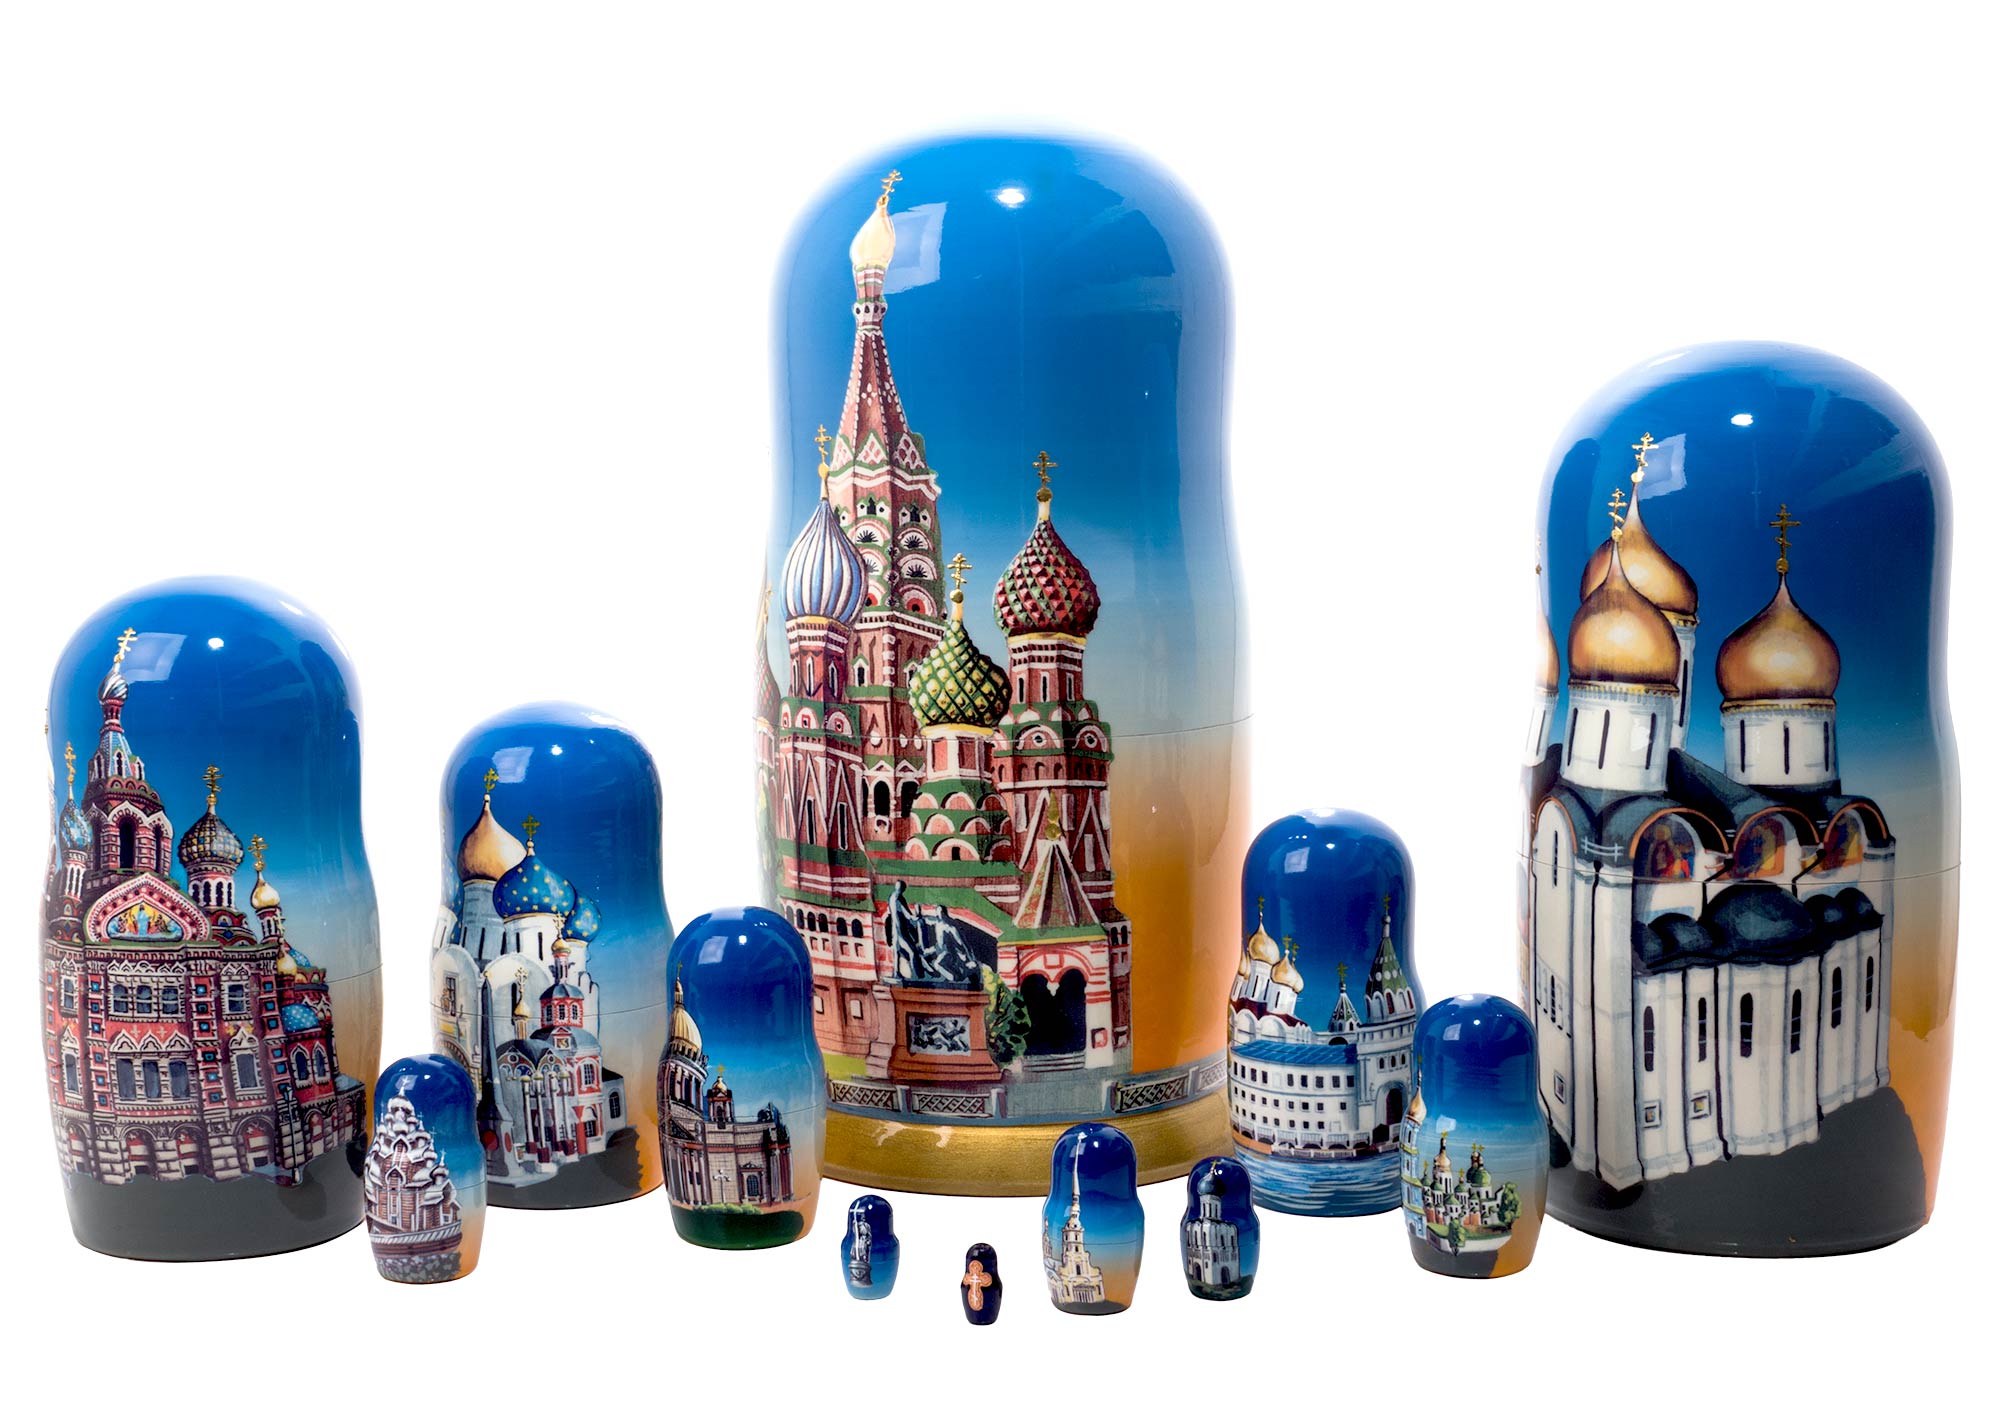 Buy Russian Orthodox Cathedrals Nesting Doll 12pc./11" at GoldenCockerel.com